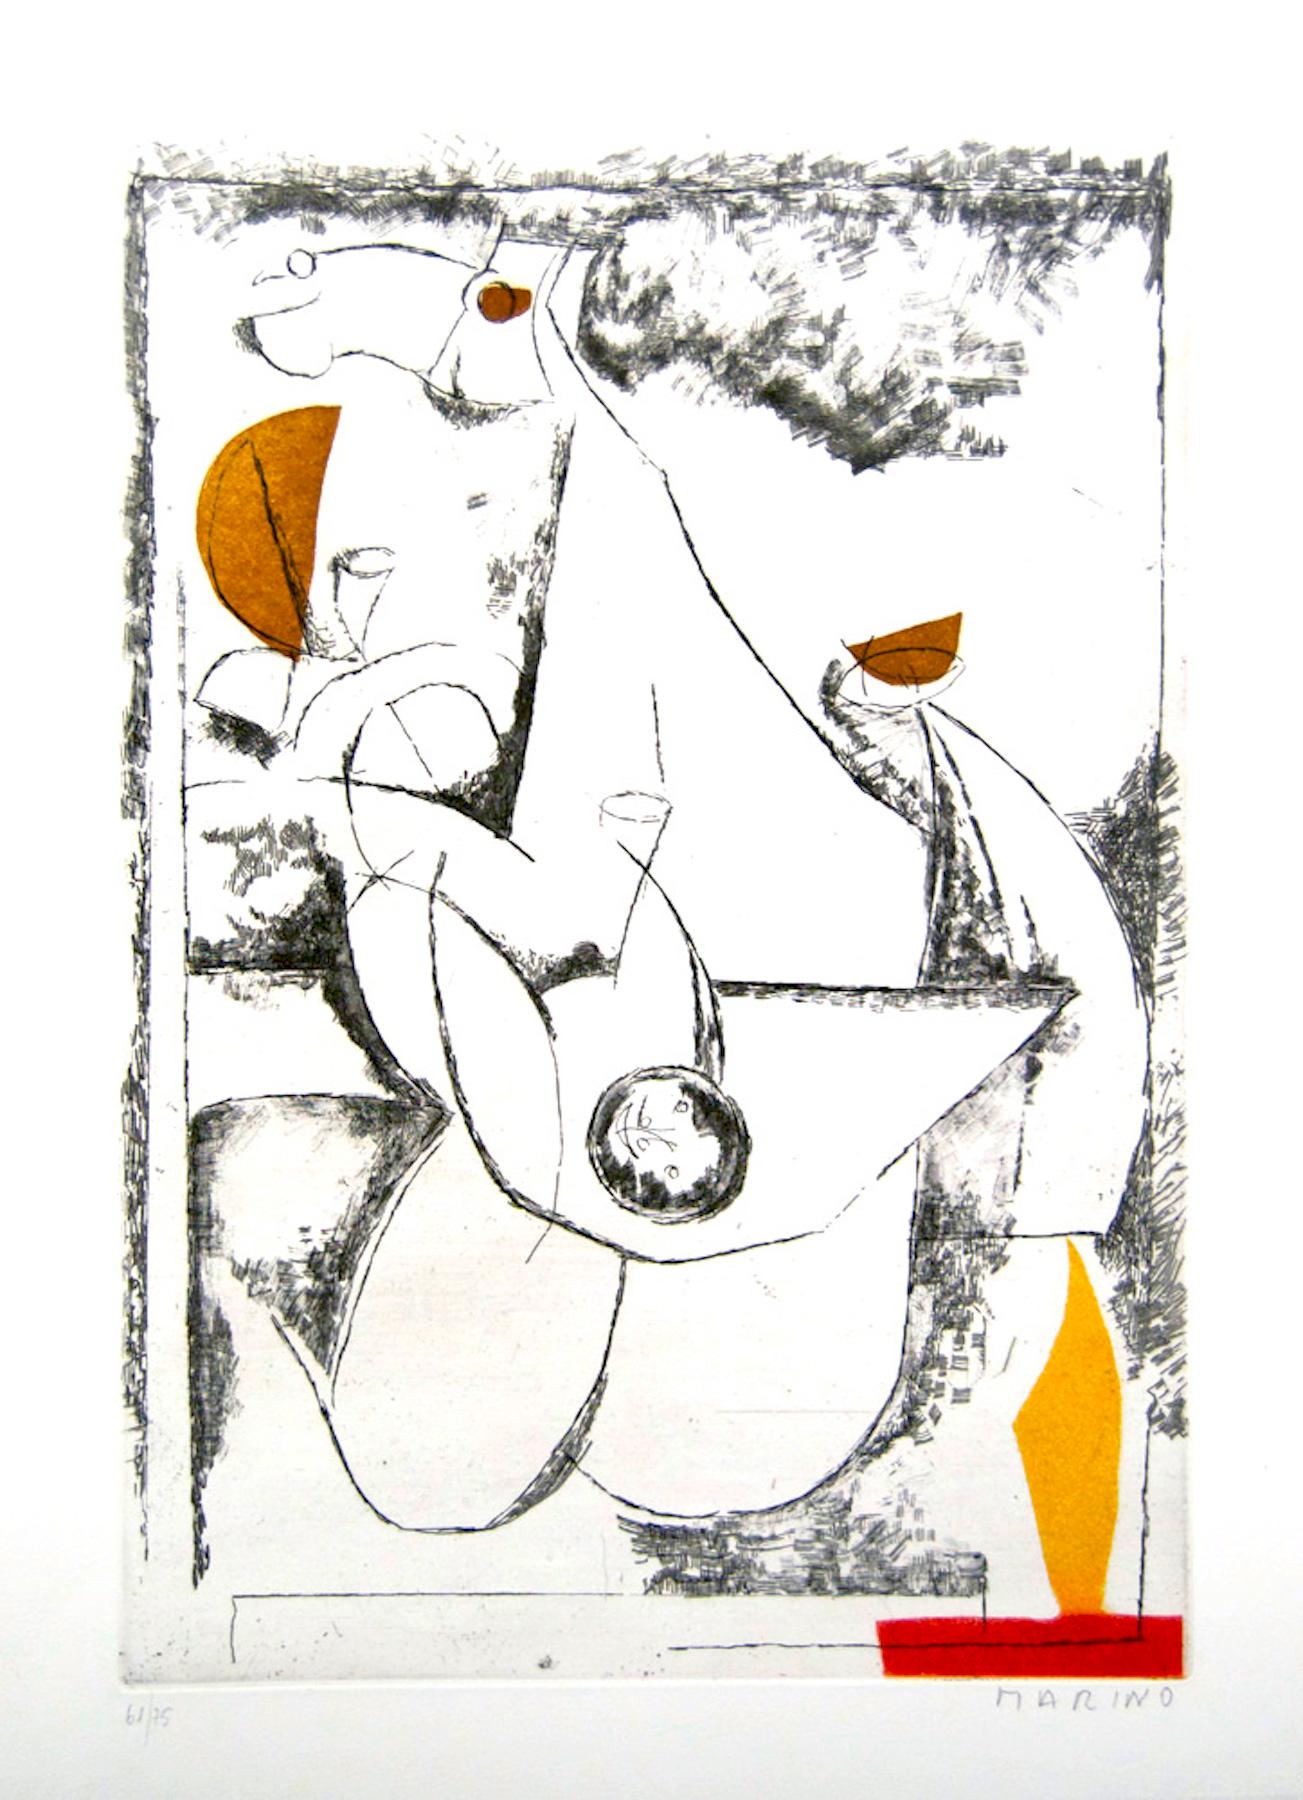 Hand signed and numbered. Edition of 75 prints.
This work is the plate IV of the serie "Tout près de Marino", published in 1971.
Ref. "Marino Marini: 1919 - 1980", by Giorgio e Guido Guastalla, Fondazione Marino Marini, Pistoia, 1990, p. 91, n. A134